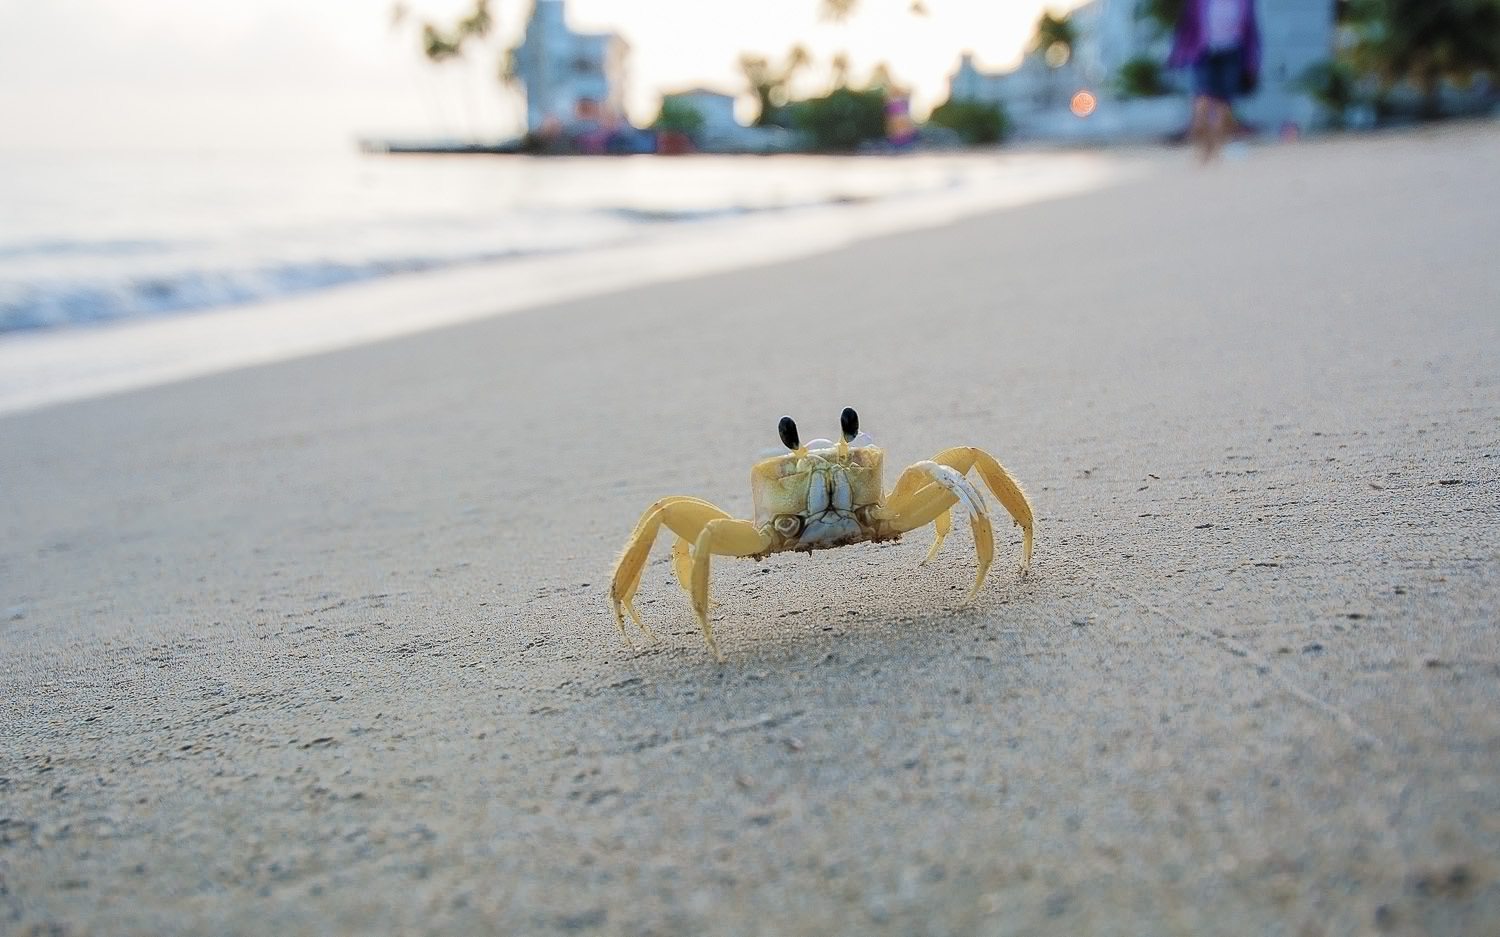 Almost Stepped on this Disabled Fearless Yellow Crab. 

So as an Apology I did an early morning photo shoot with him (or her).  Great subject to work with. 

#IslaVerde #PuertoRico